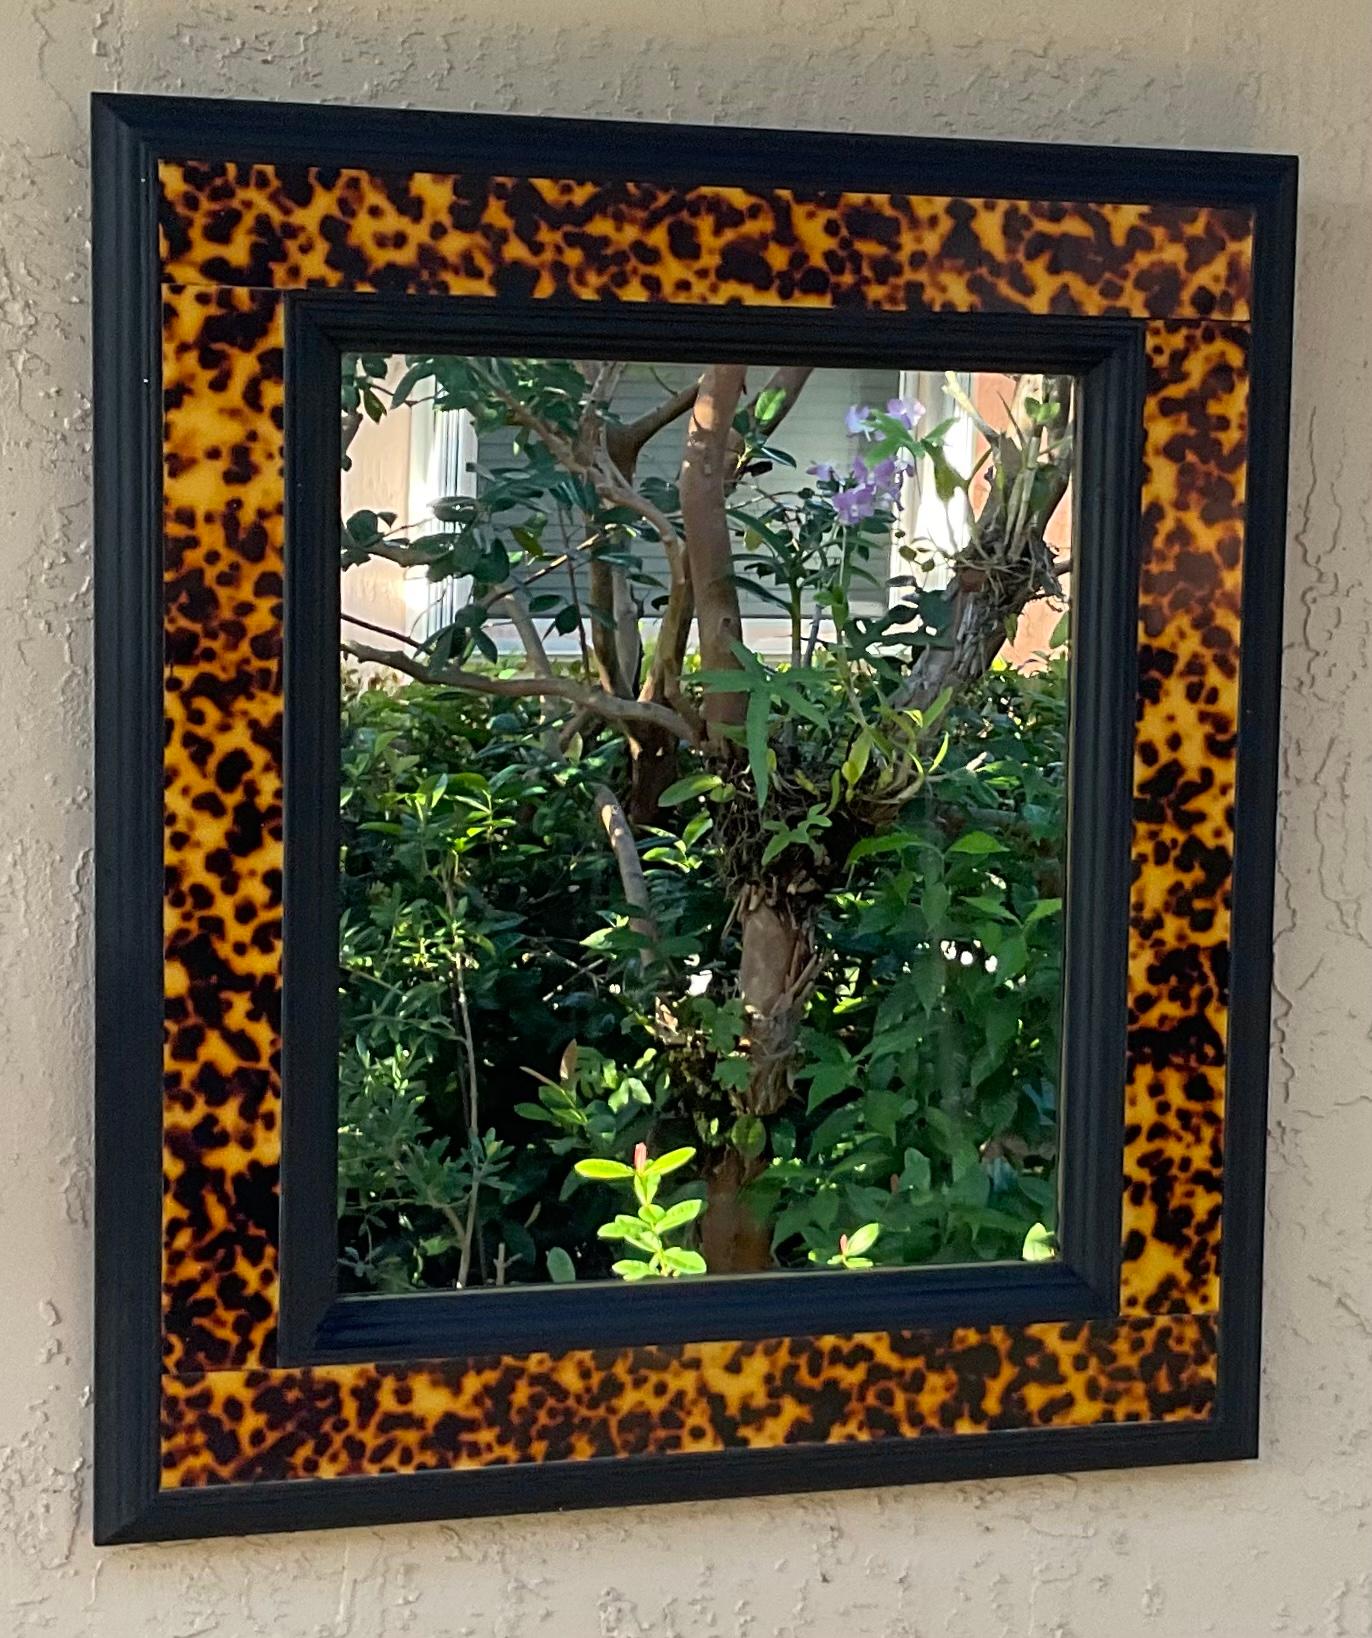 Beautiful mirror framed with decorative double solid wood frame and turtle shell Lucite faux border. 
Glass mirror size only: 16”x 20”.